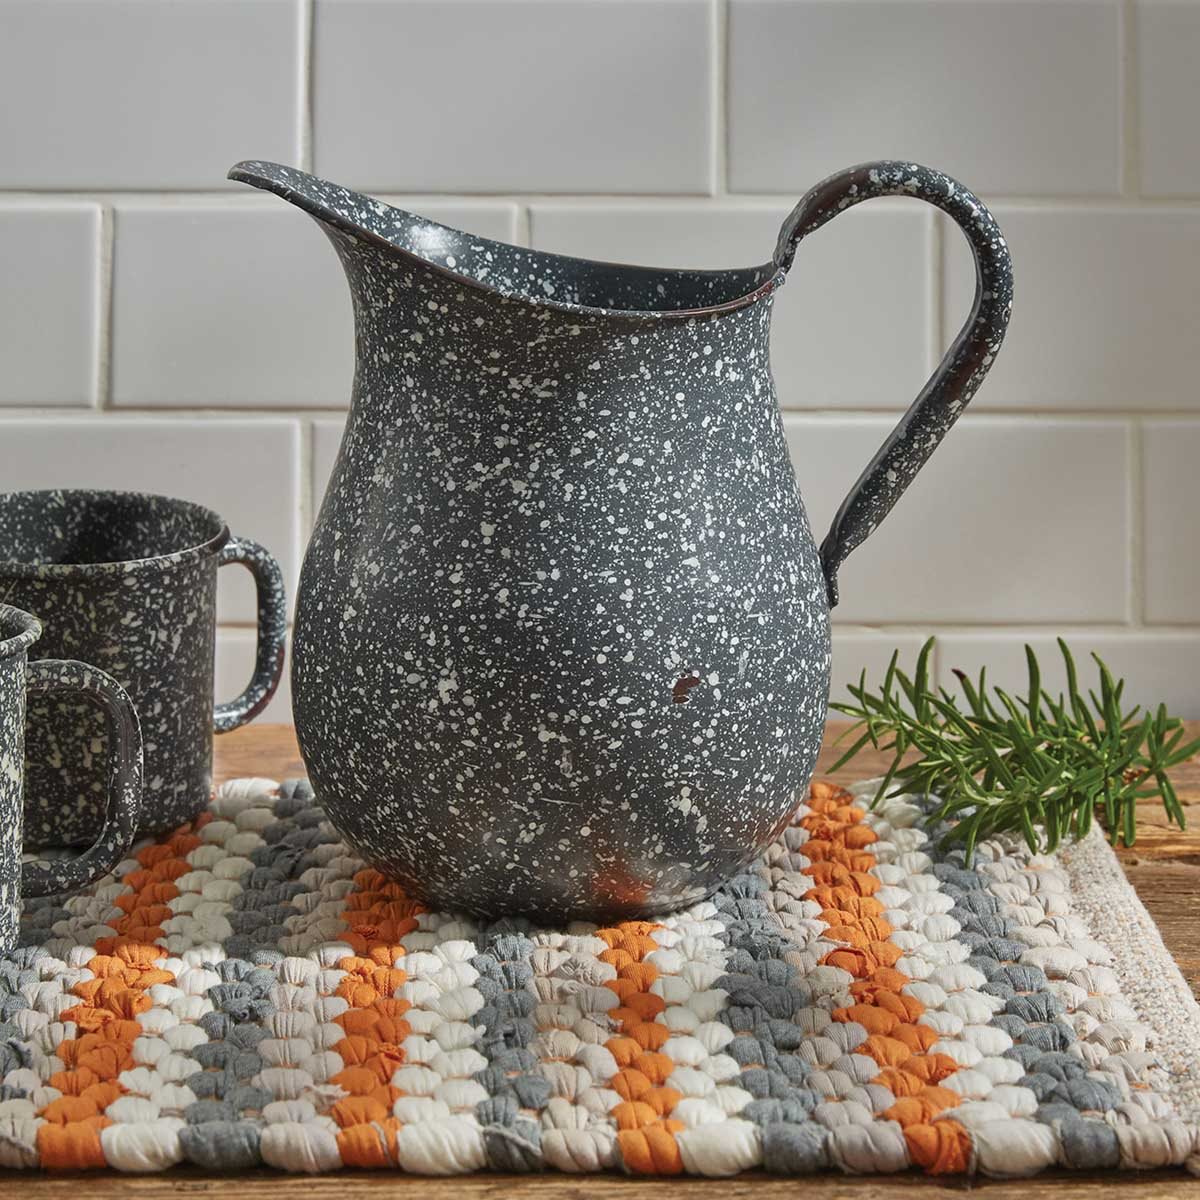 Granite Enamelware Gray - Pitcher with Lid